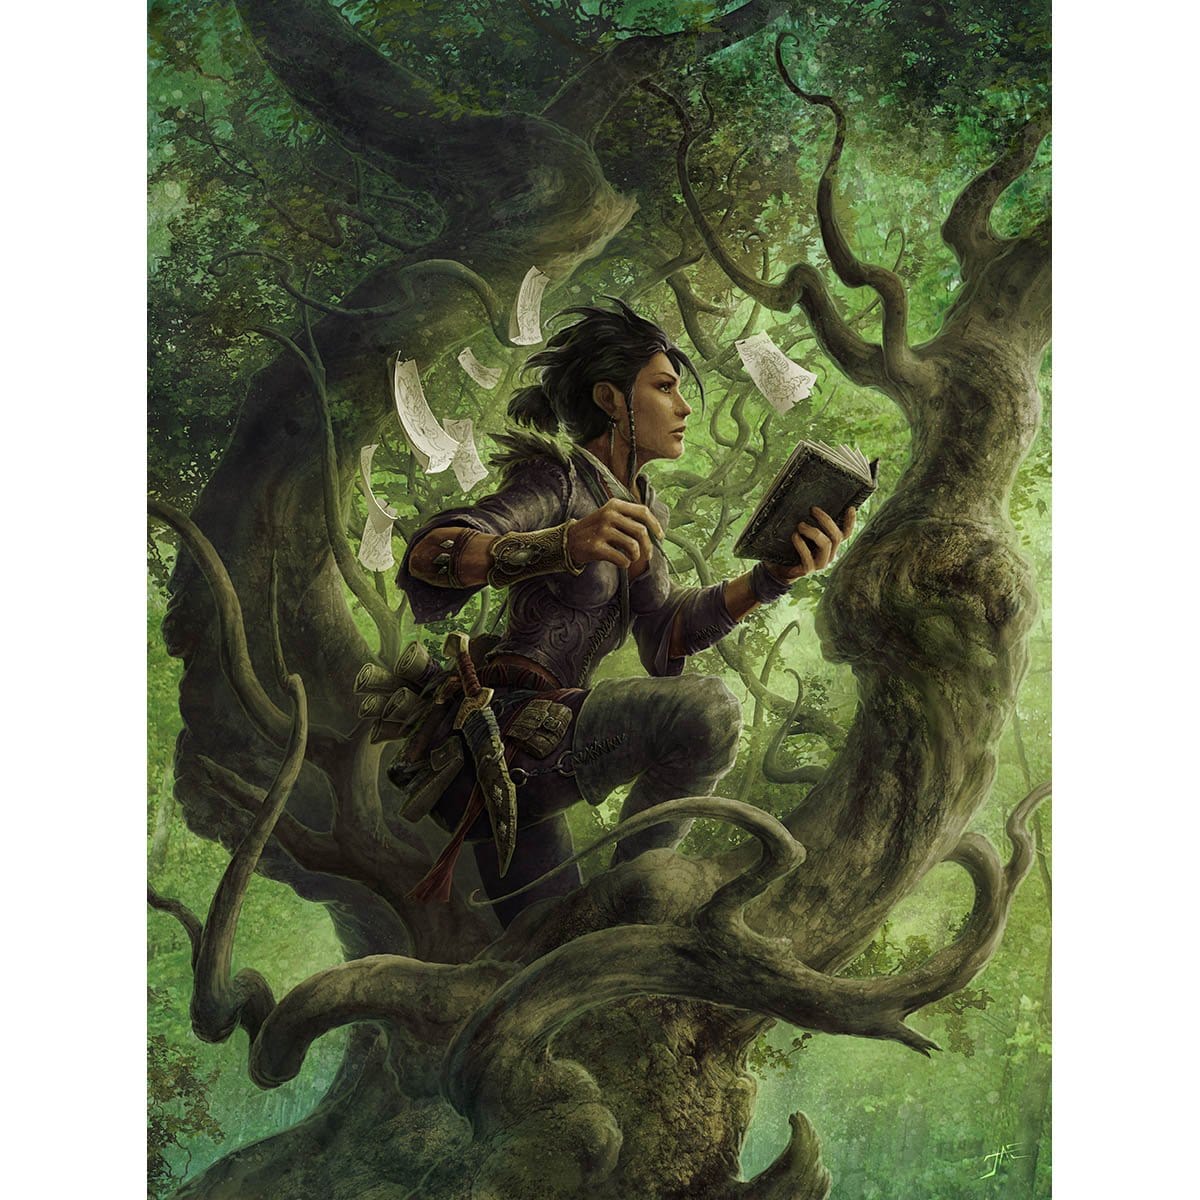 Mwonvuli Beast Tracker Print - Print - Original Magic Art - Accessories for Magic the Gathering and other card games